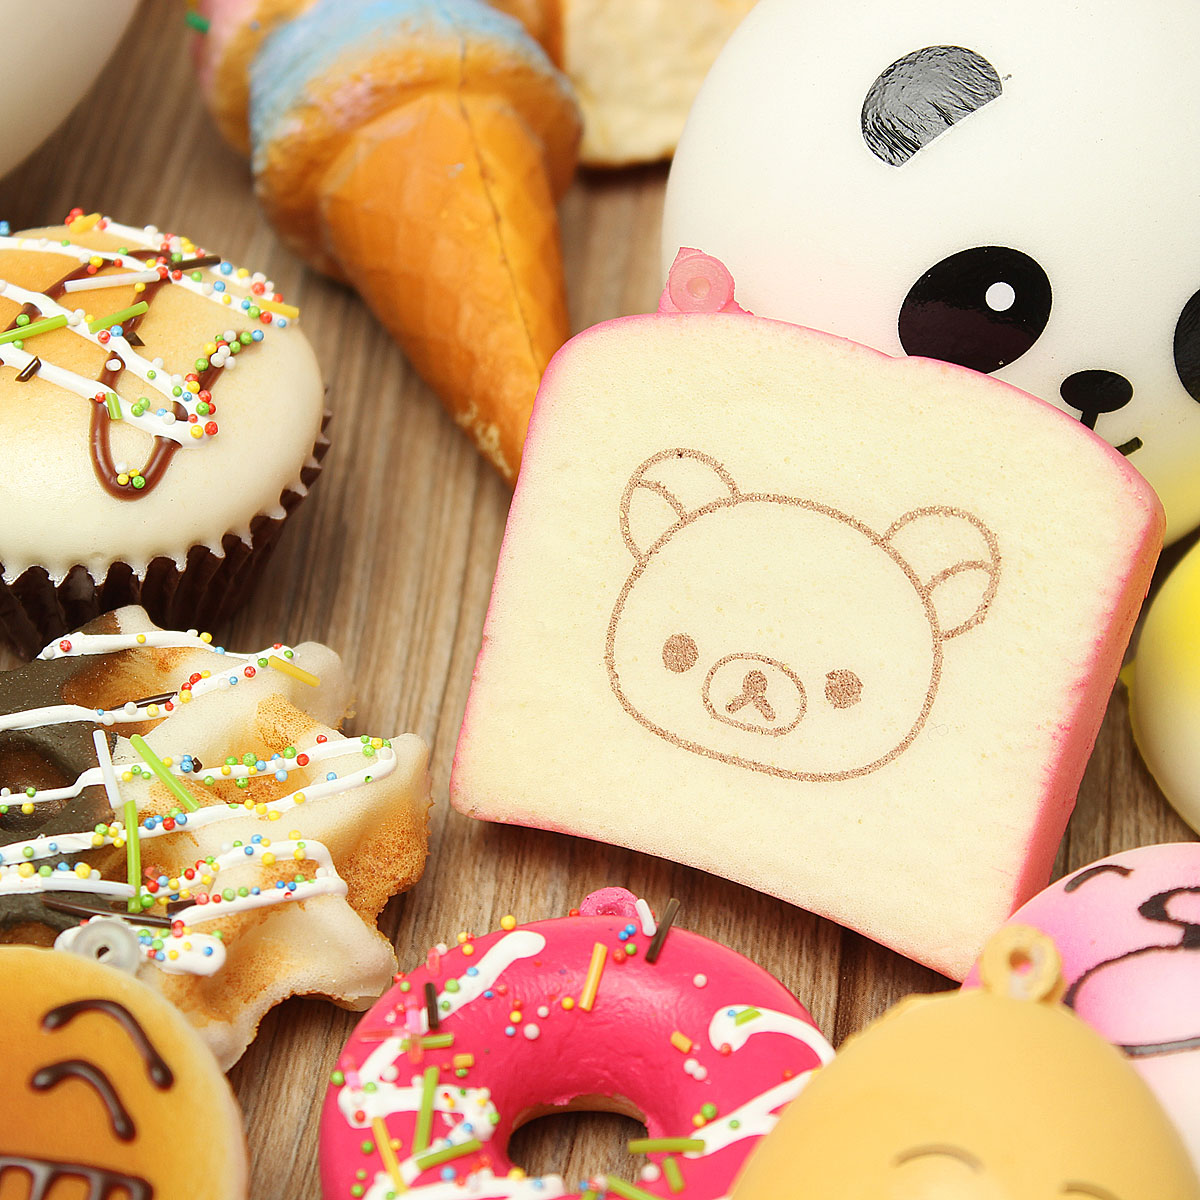 18PCS-Squishy-Christmas-Gift-Decor-Panda-Cup-Cake-Toasts-Buns-Donuts-Random-Soft-Cell-Phone-Straps-1069615-5